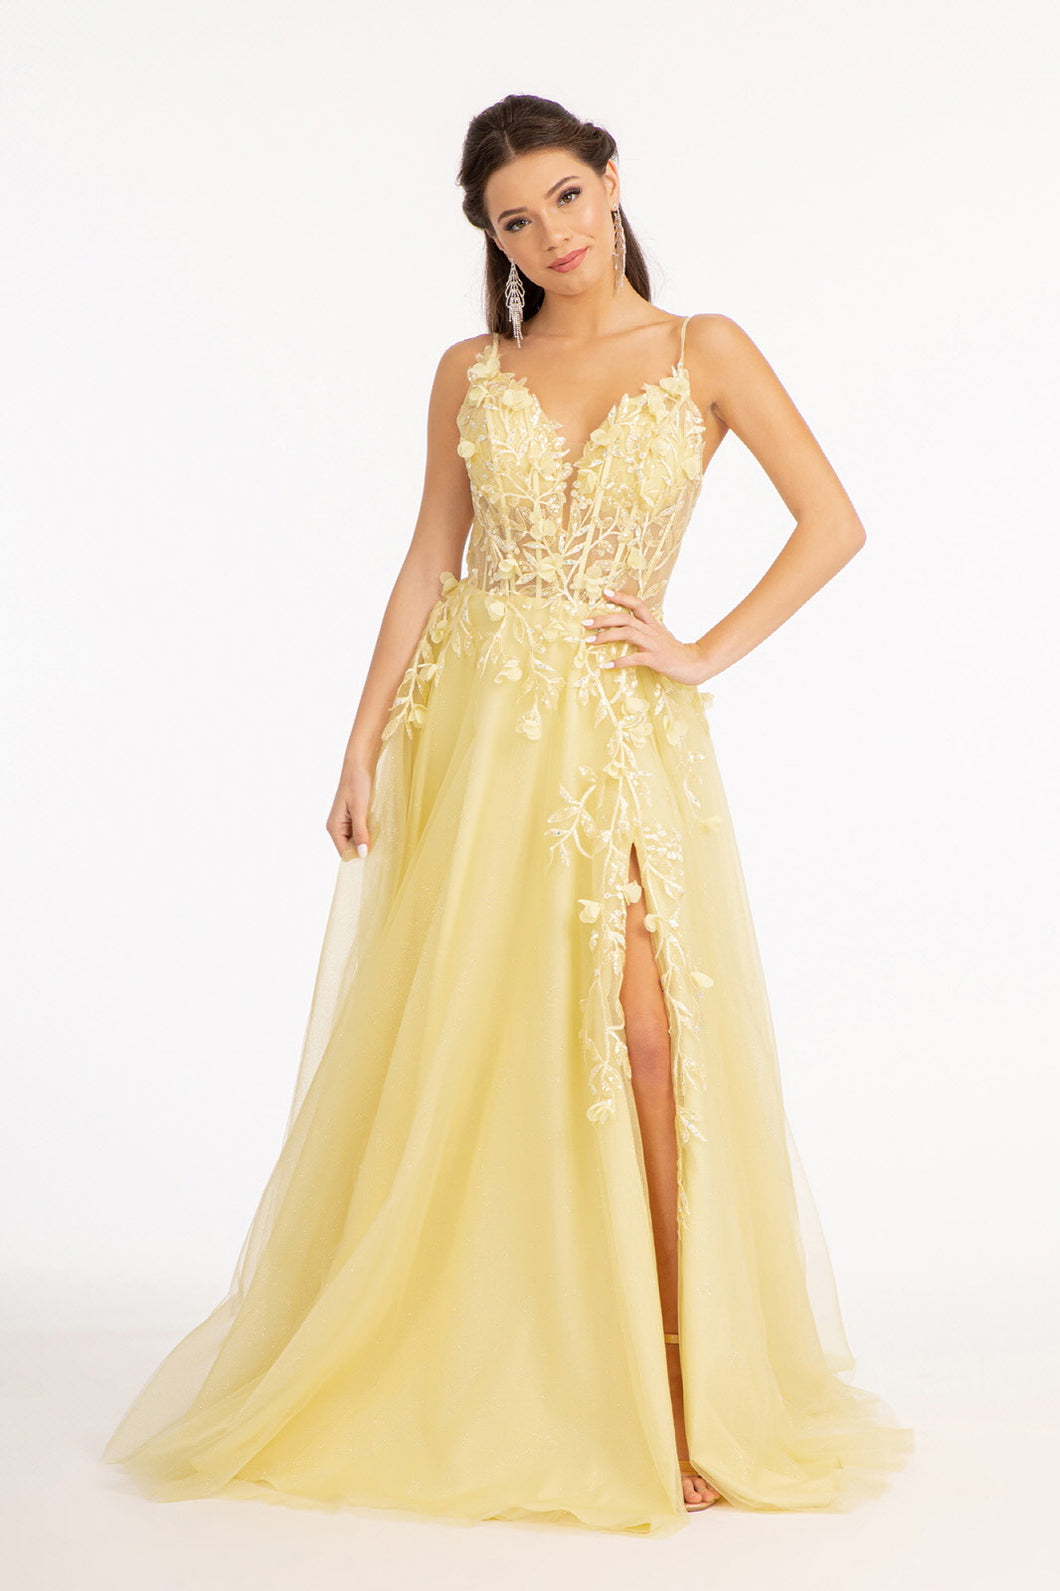 GL 3034 - Shimmer Tulle A-Line Prom Gown with Sheer Boned Beaded 3D Floral Appliqued Bodice Leg Slit & Open Corset Back Dresses GLS XS YELLOW 